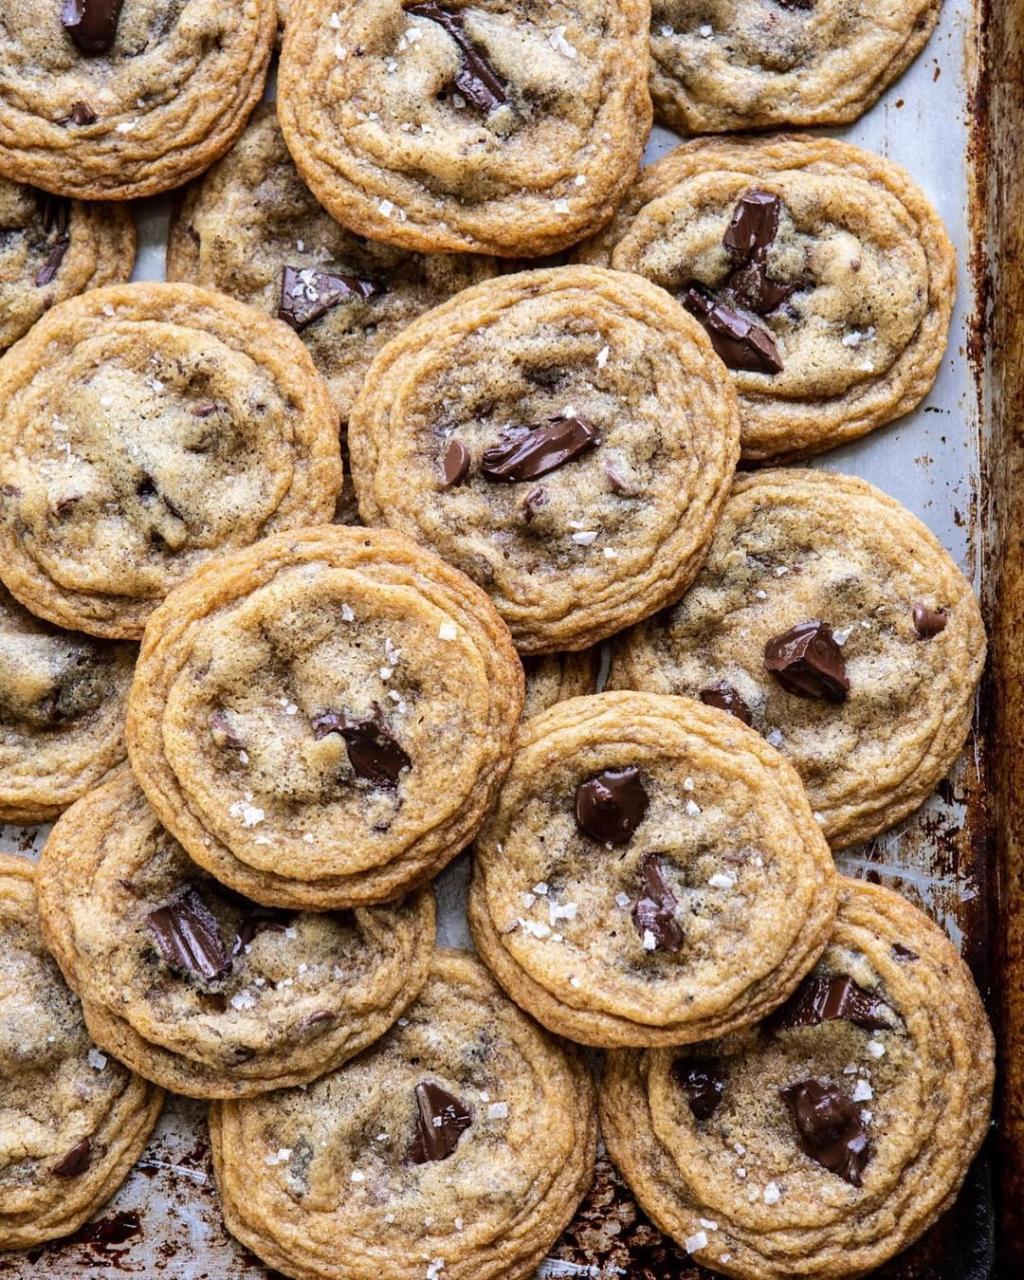 Country Living shared a post on Instagram: “The perfect cookie doesn't exis...😍 We'll be